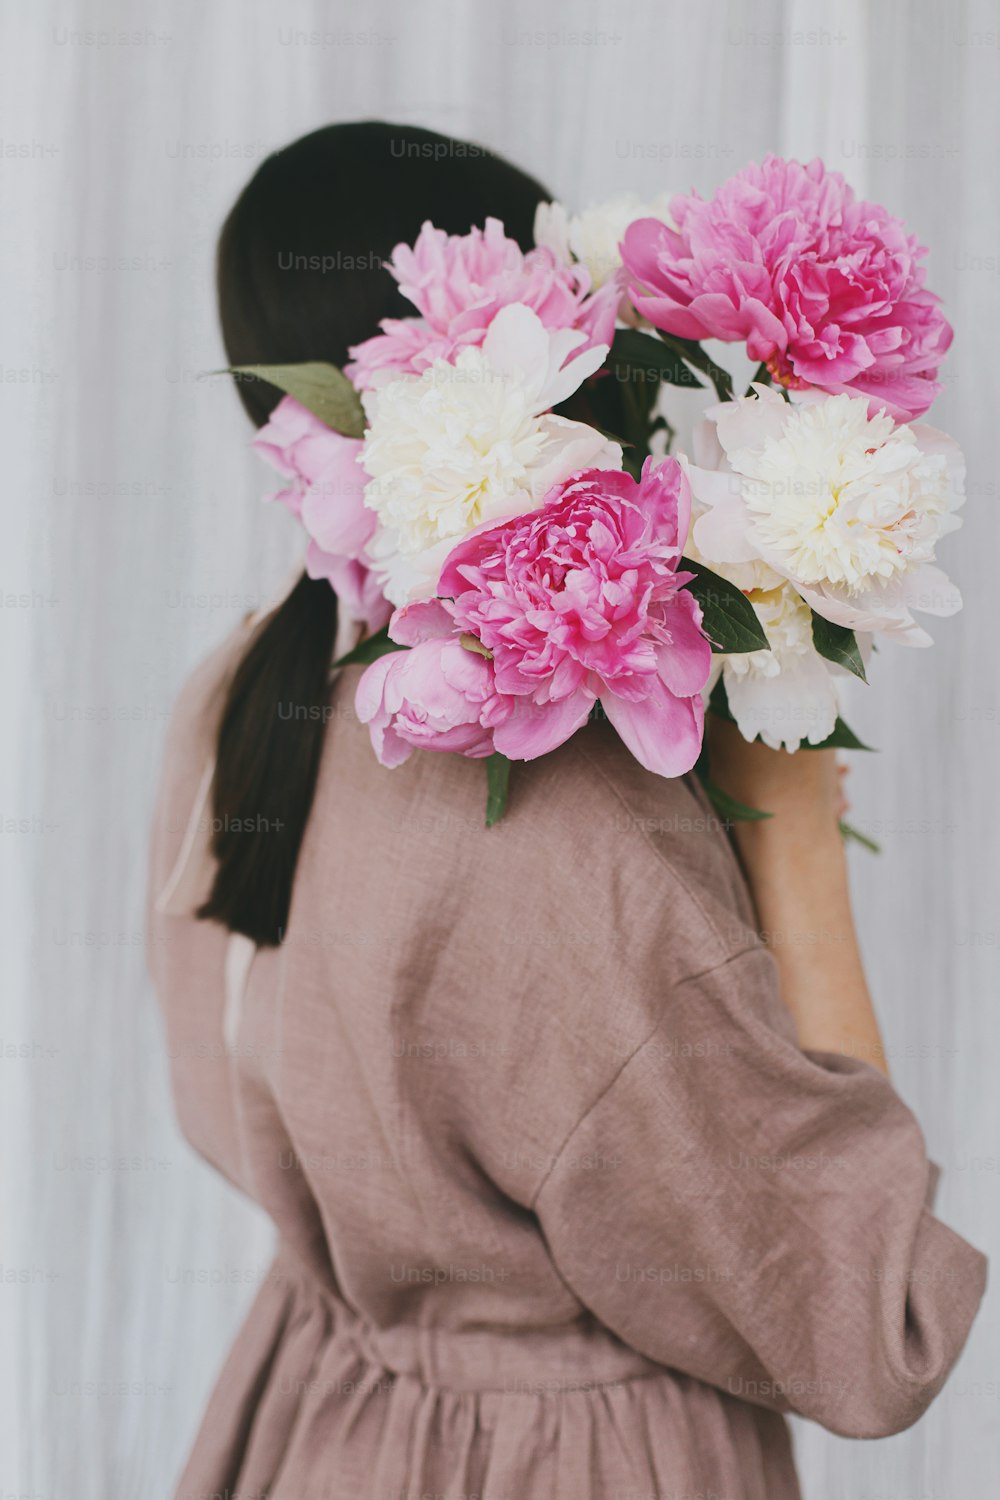 Stylish woman in linen dress holding peony bouquet on background of white fabric. Slow life, little happy things. Young female in boho rustic dress hiding face with pink and white peonies.